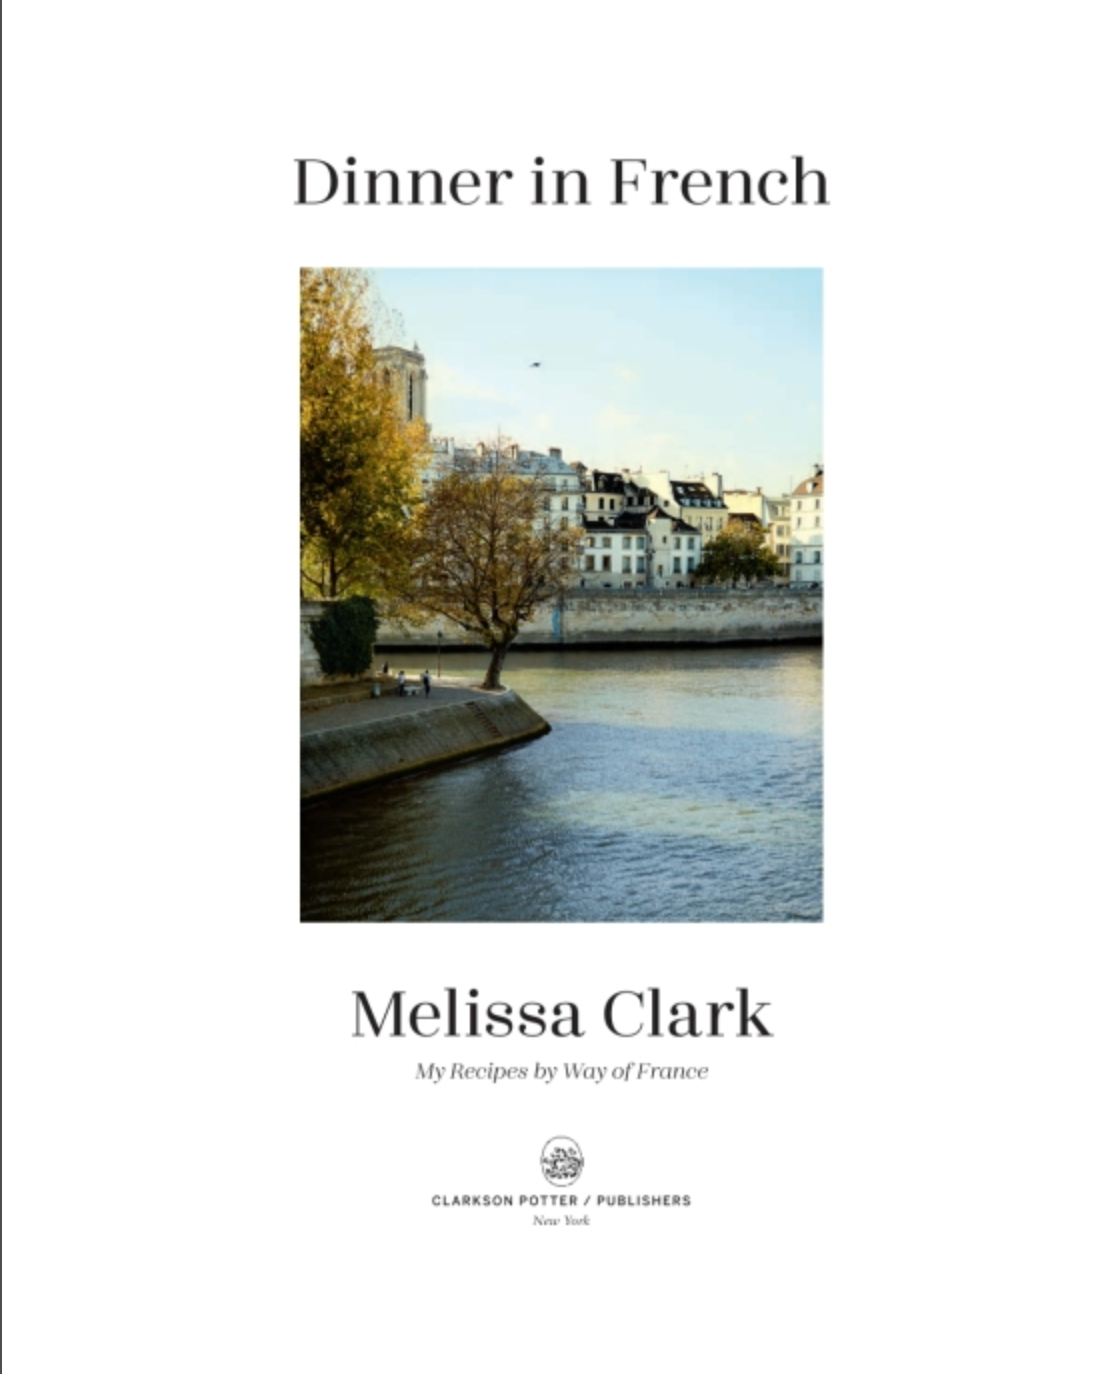 BOOK "DINNER IN FRENCH"